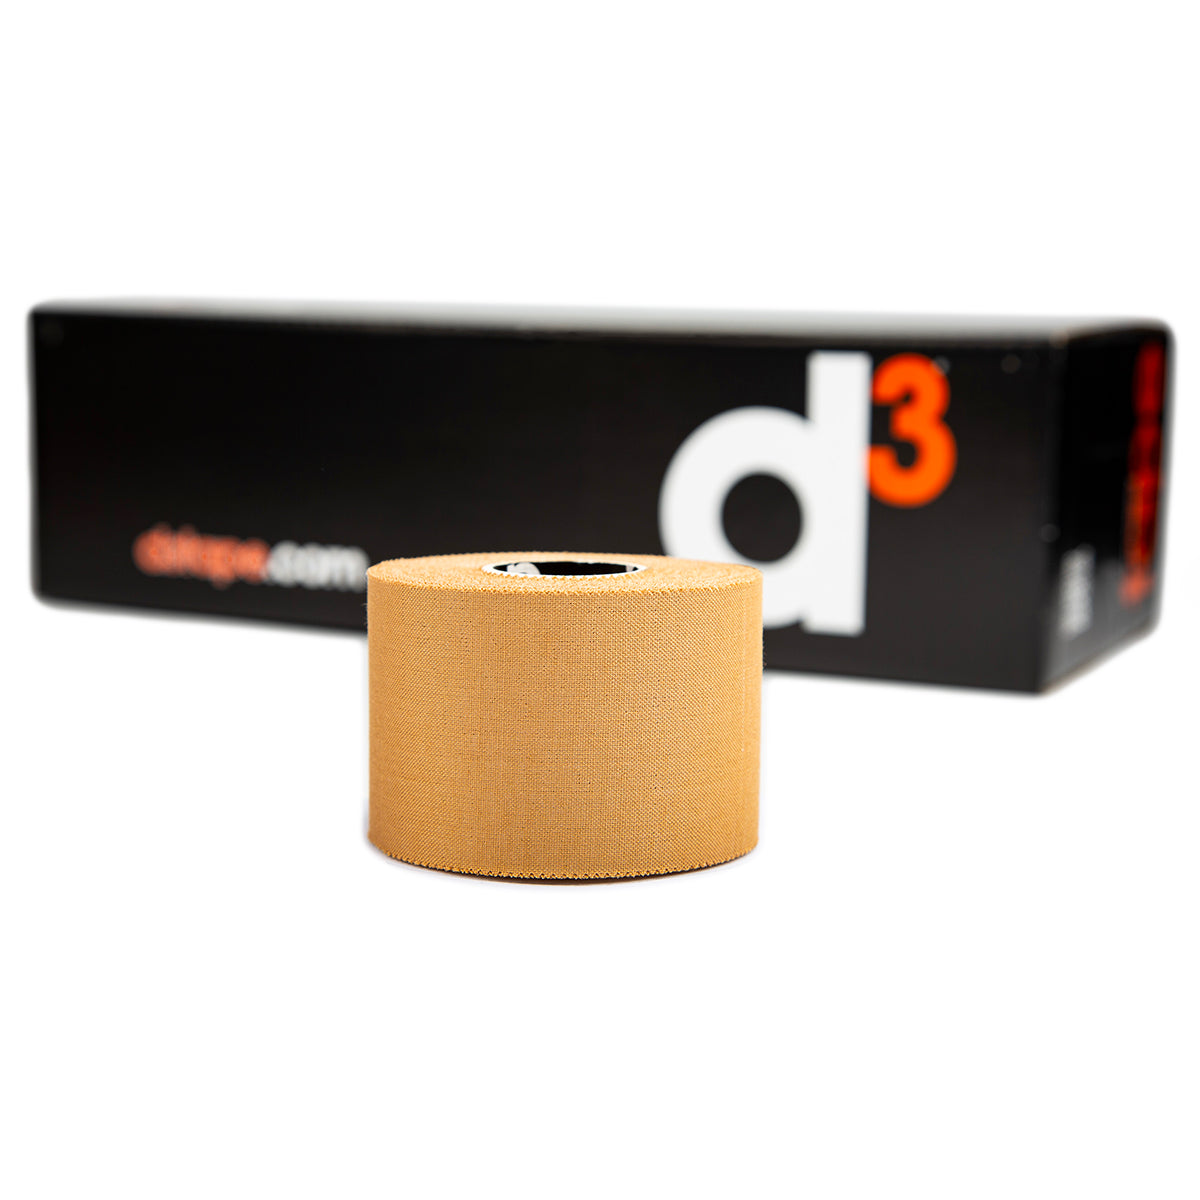 d3 Rigid Strapping Tape 50mm x 15Mtr - Single Roll unpacked